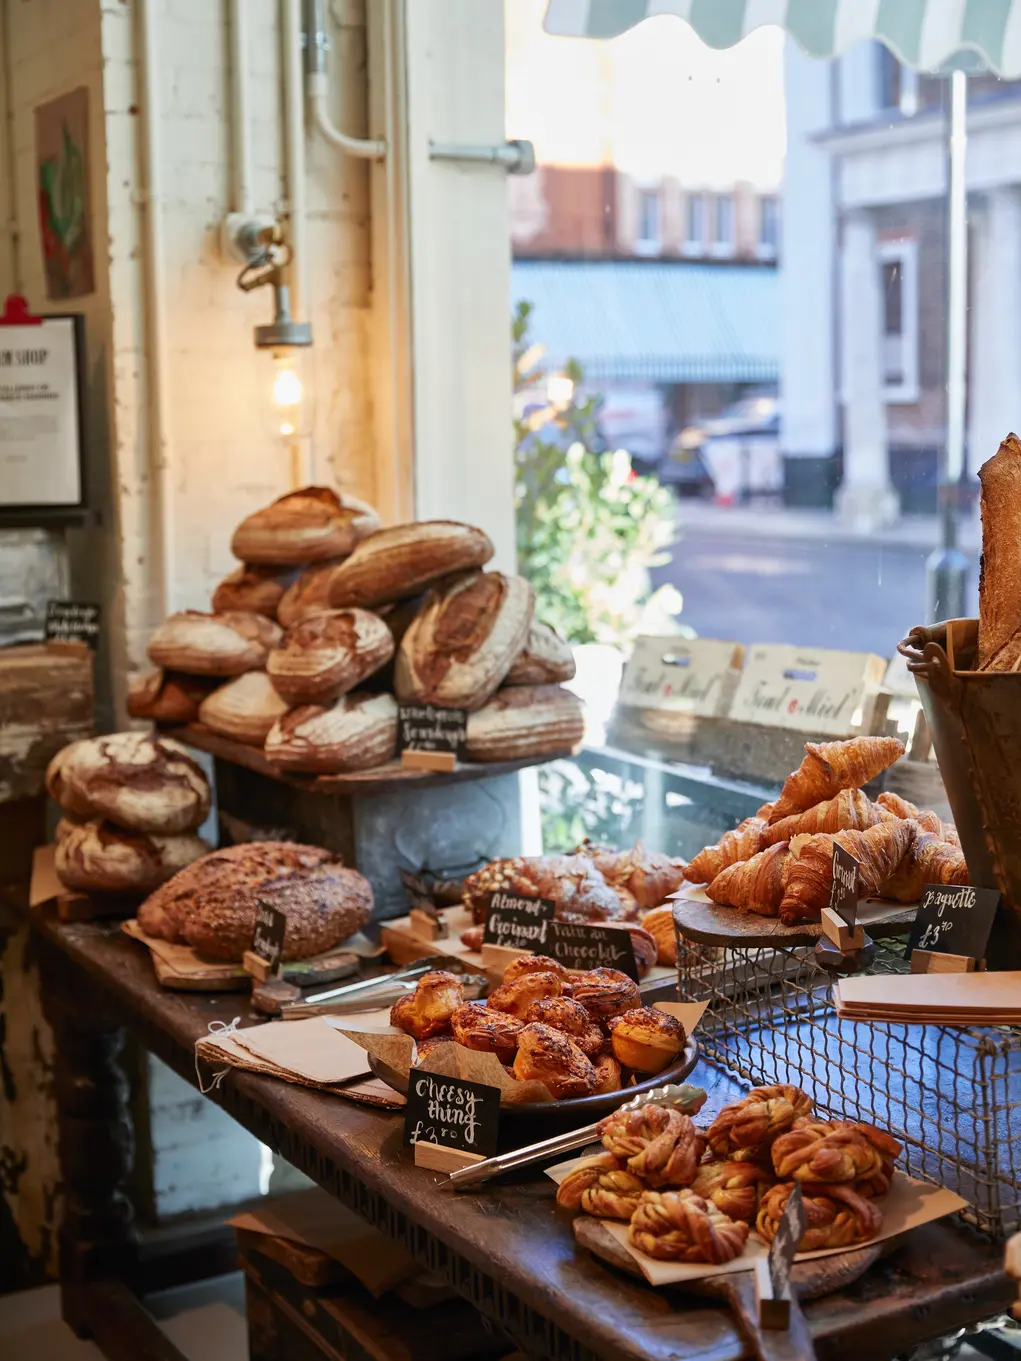 Farm Shop bread and baked goods